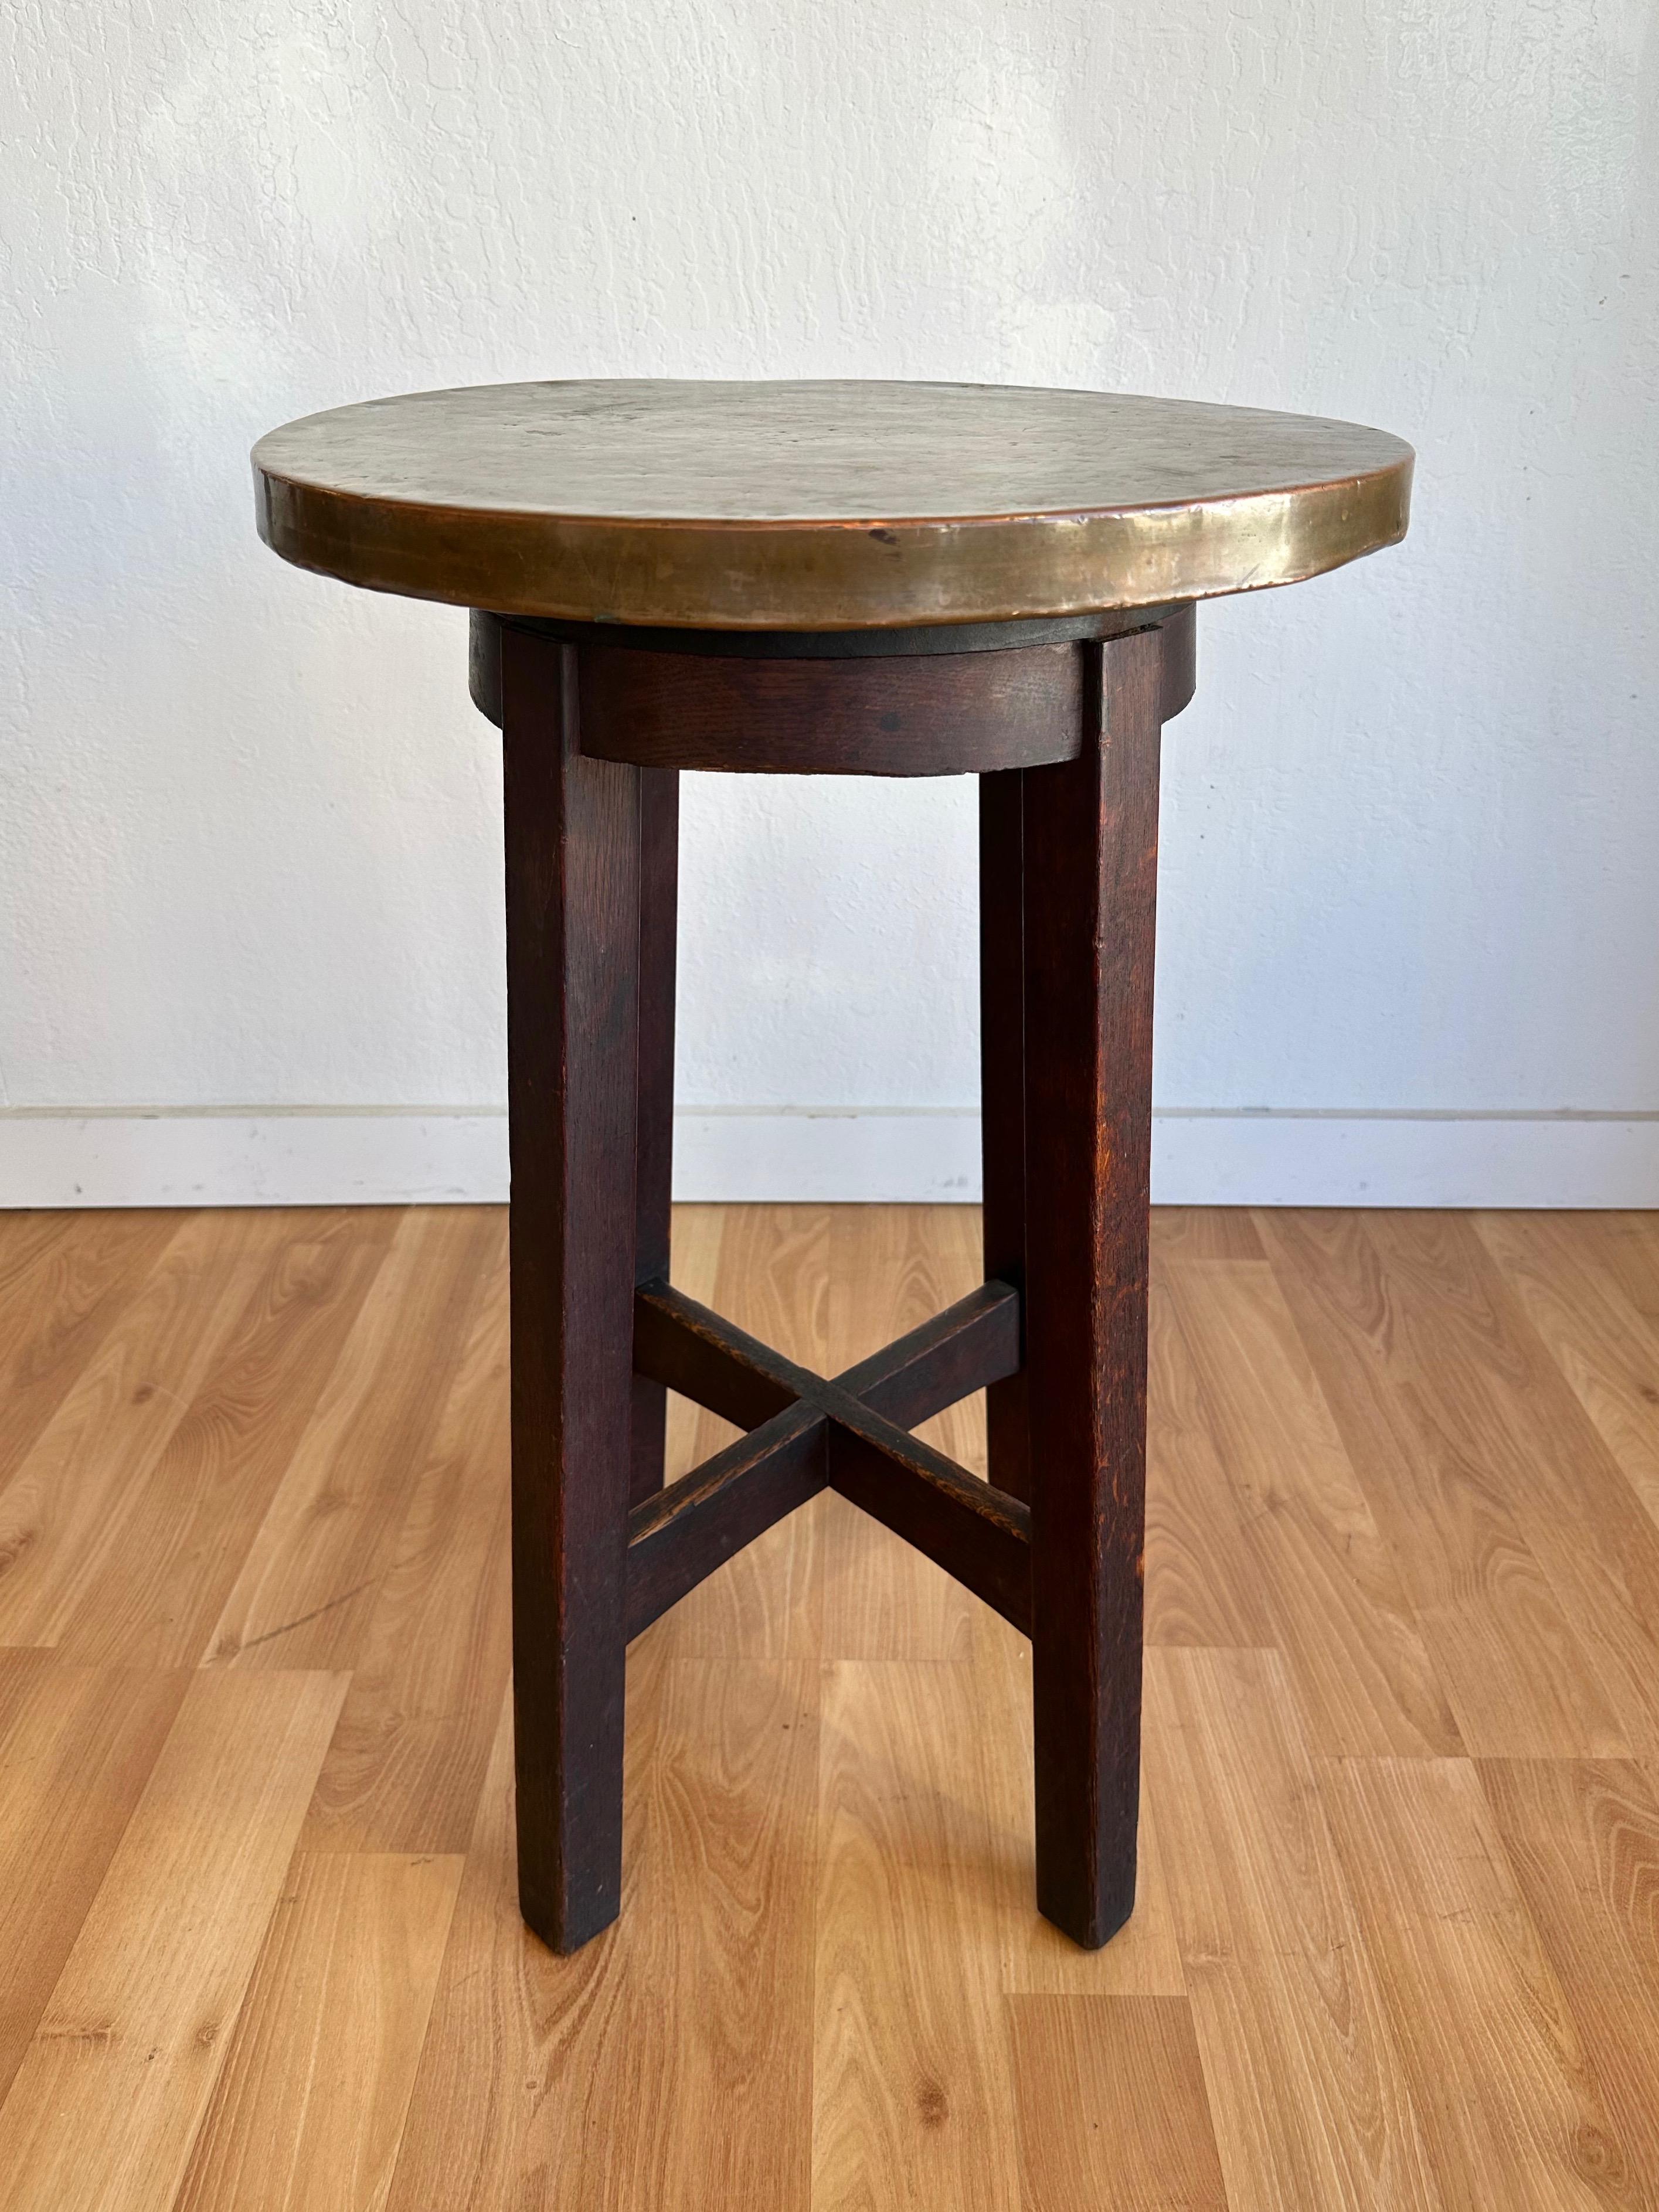 A circa 1920s Arts and Crafts movement or Mission style oak side table or plant stand with copper top.

Round 1.25-inch-thick wood top completely clad in a single sheet of hand-shaped copper. A 1-inch-thick seamless wrought iron band sits inset just